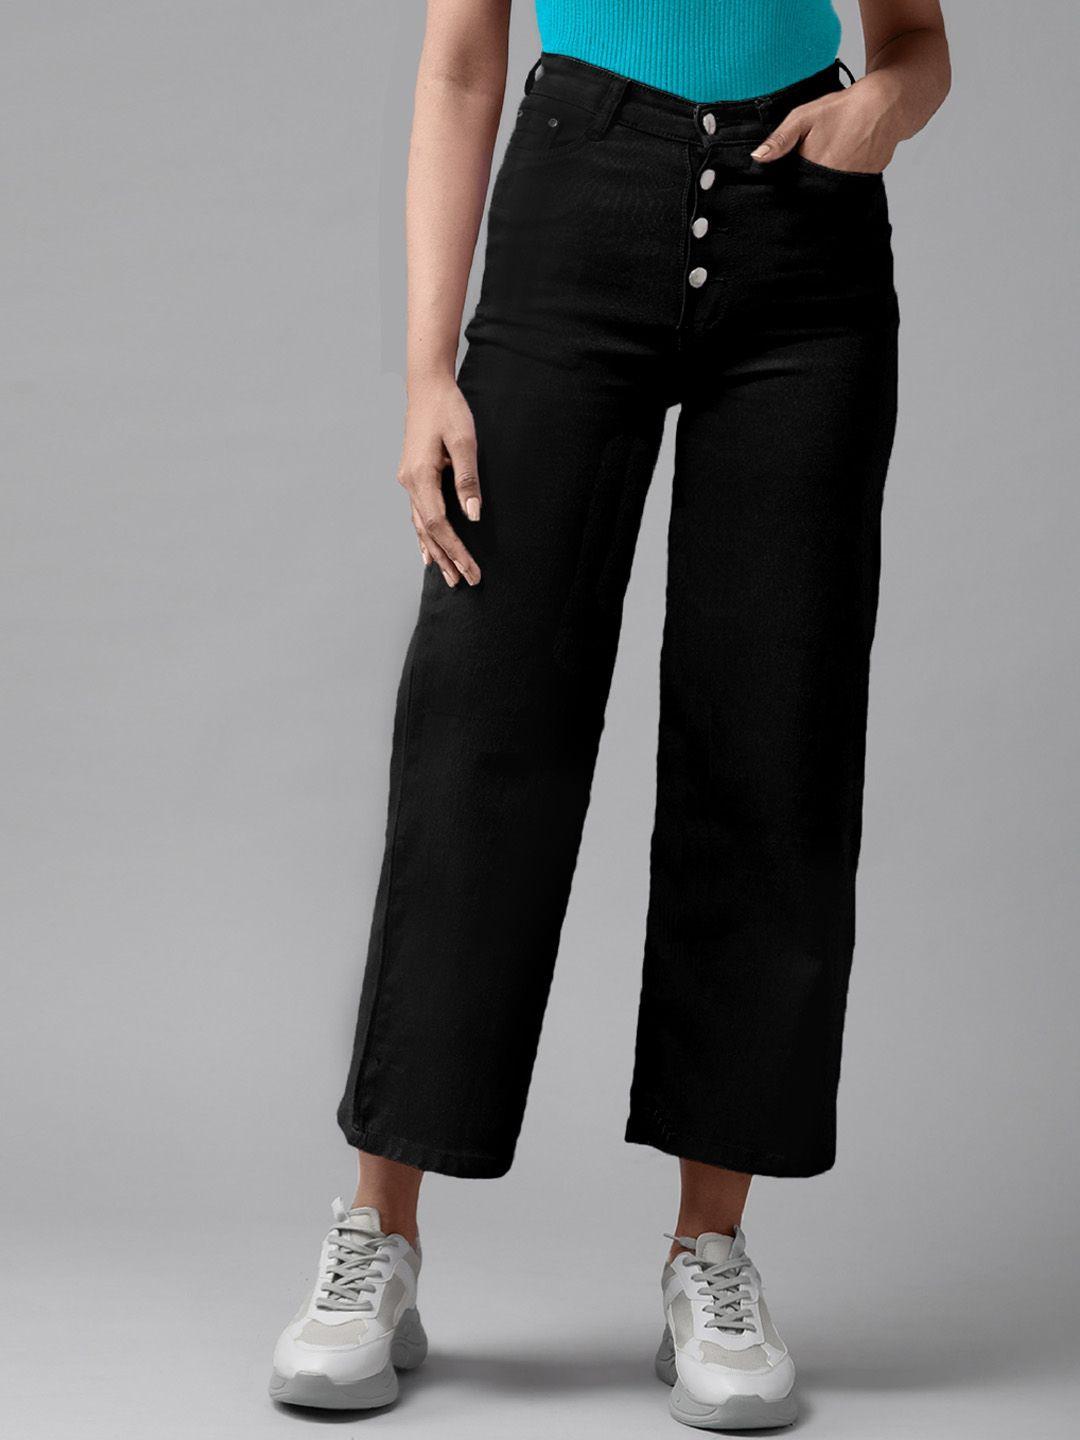 the dry state black women mid-rise relaxed straight fit jeans